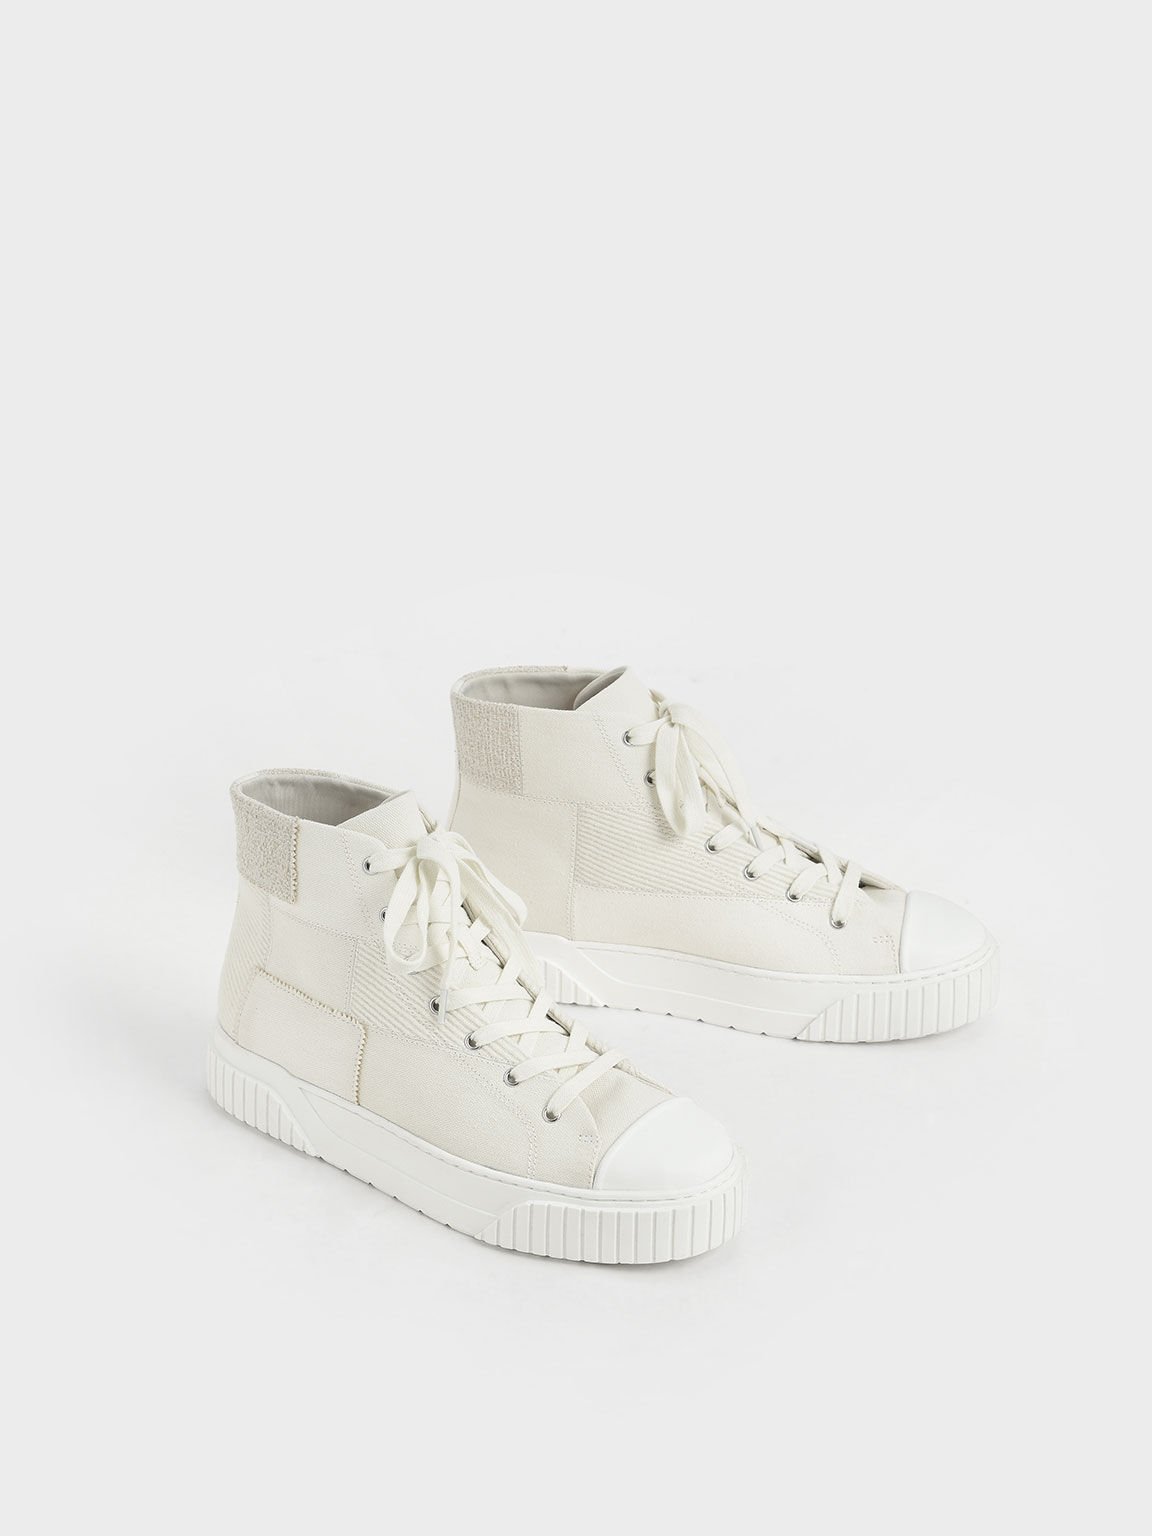 Woven Fabric High Top Sneakers, Chalk, hi-res